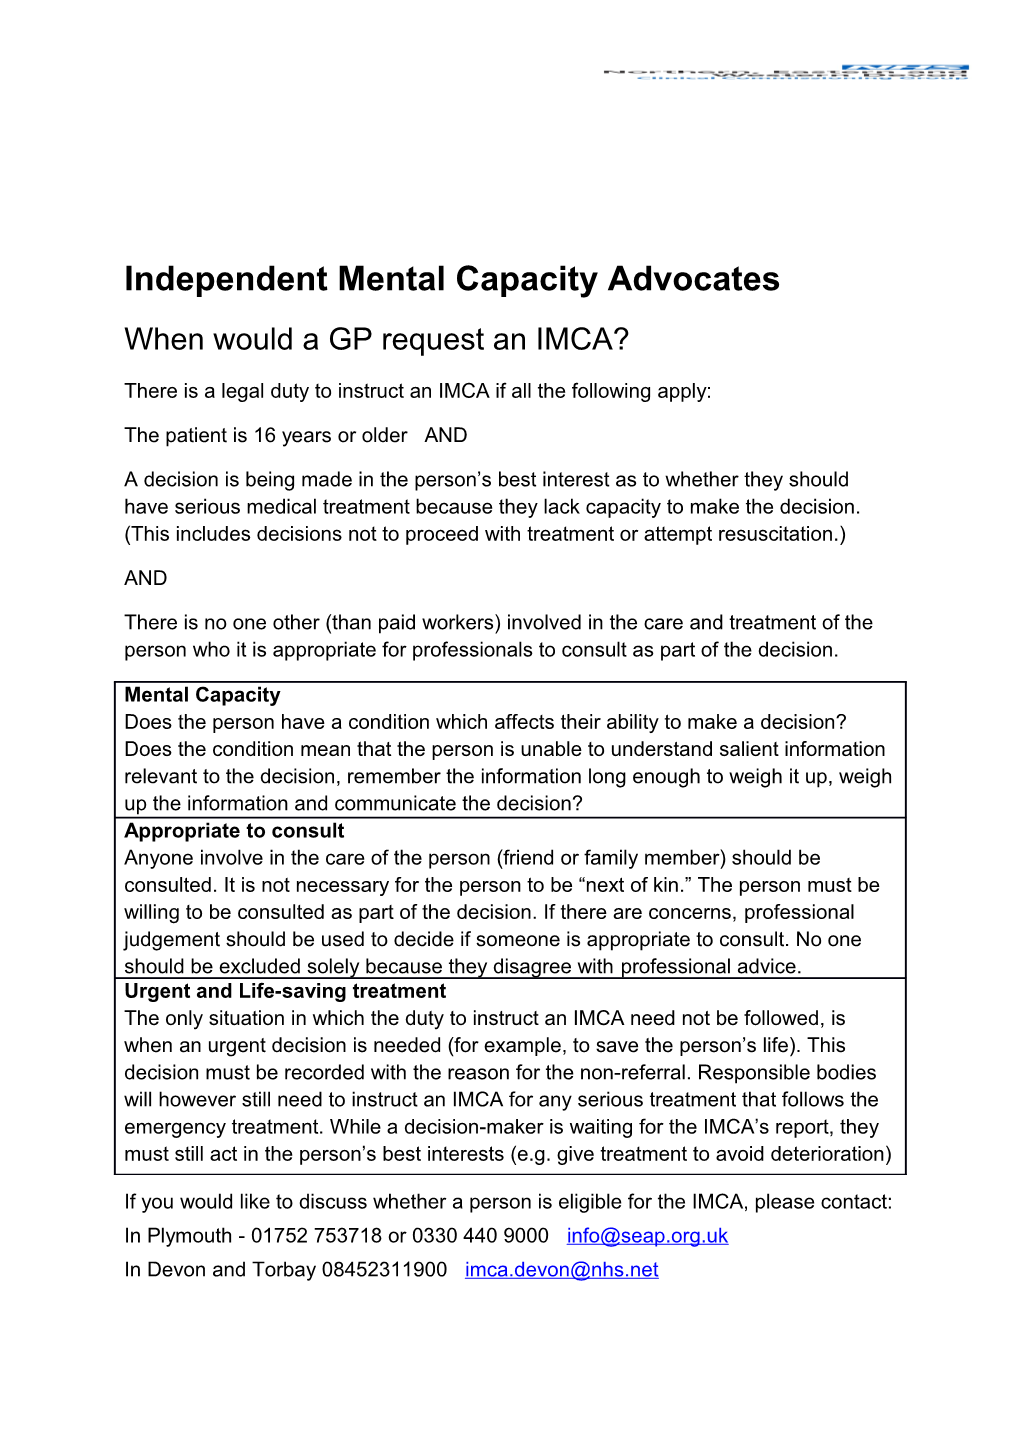 Independent Mental Capacity Advocates